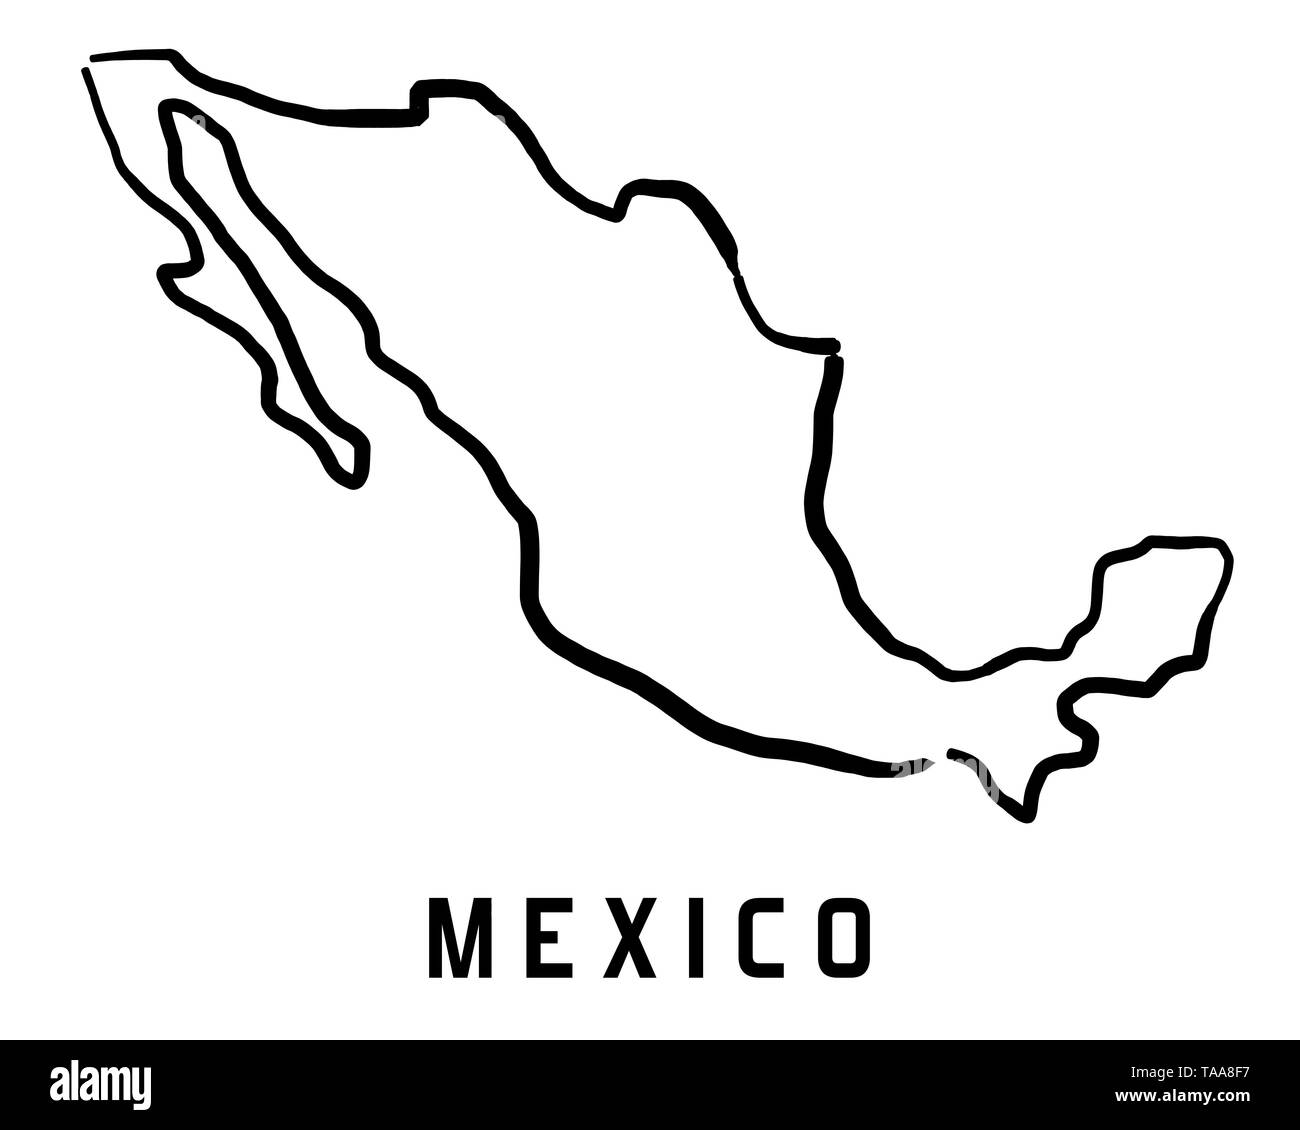 Mexico map outline - smooth simplified country shape map vector. Stock Vector